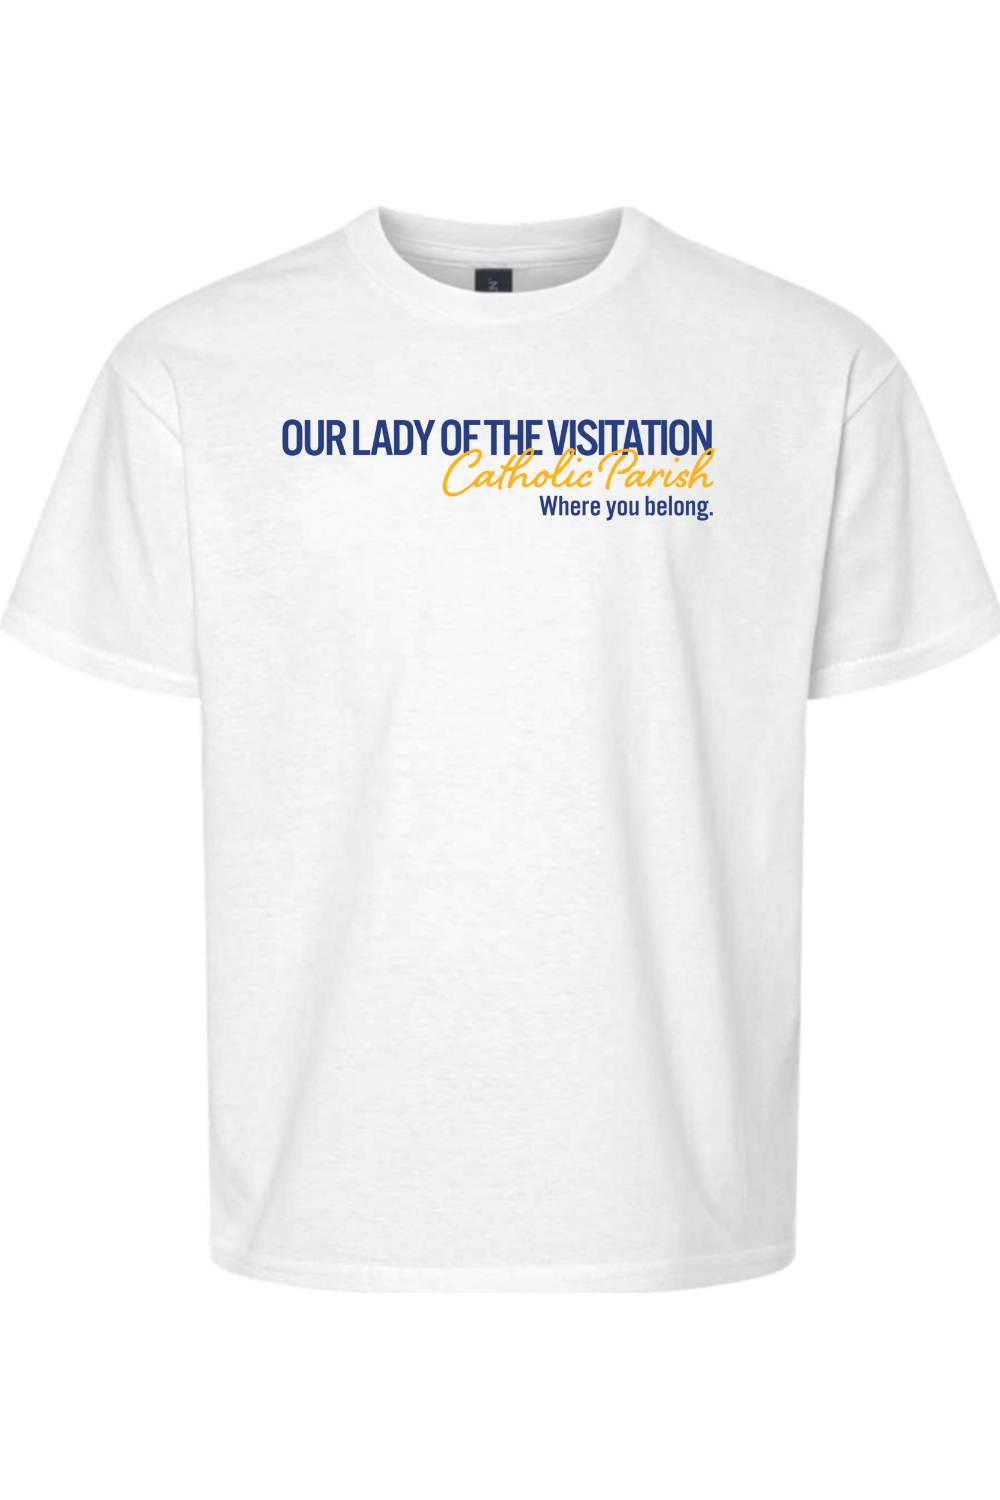 Our Lady of the Visitation Block Youth T-Shirt